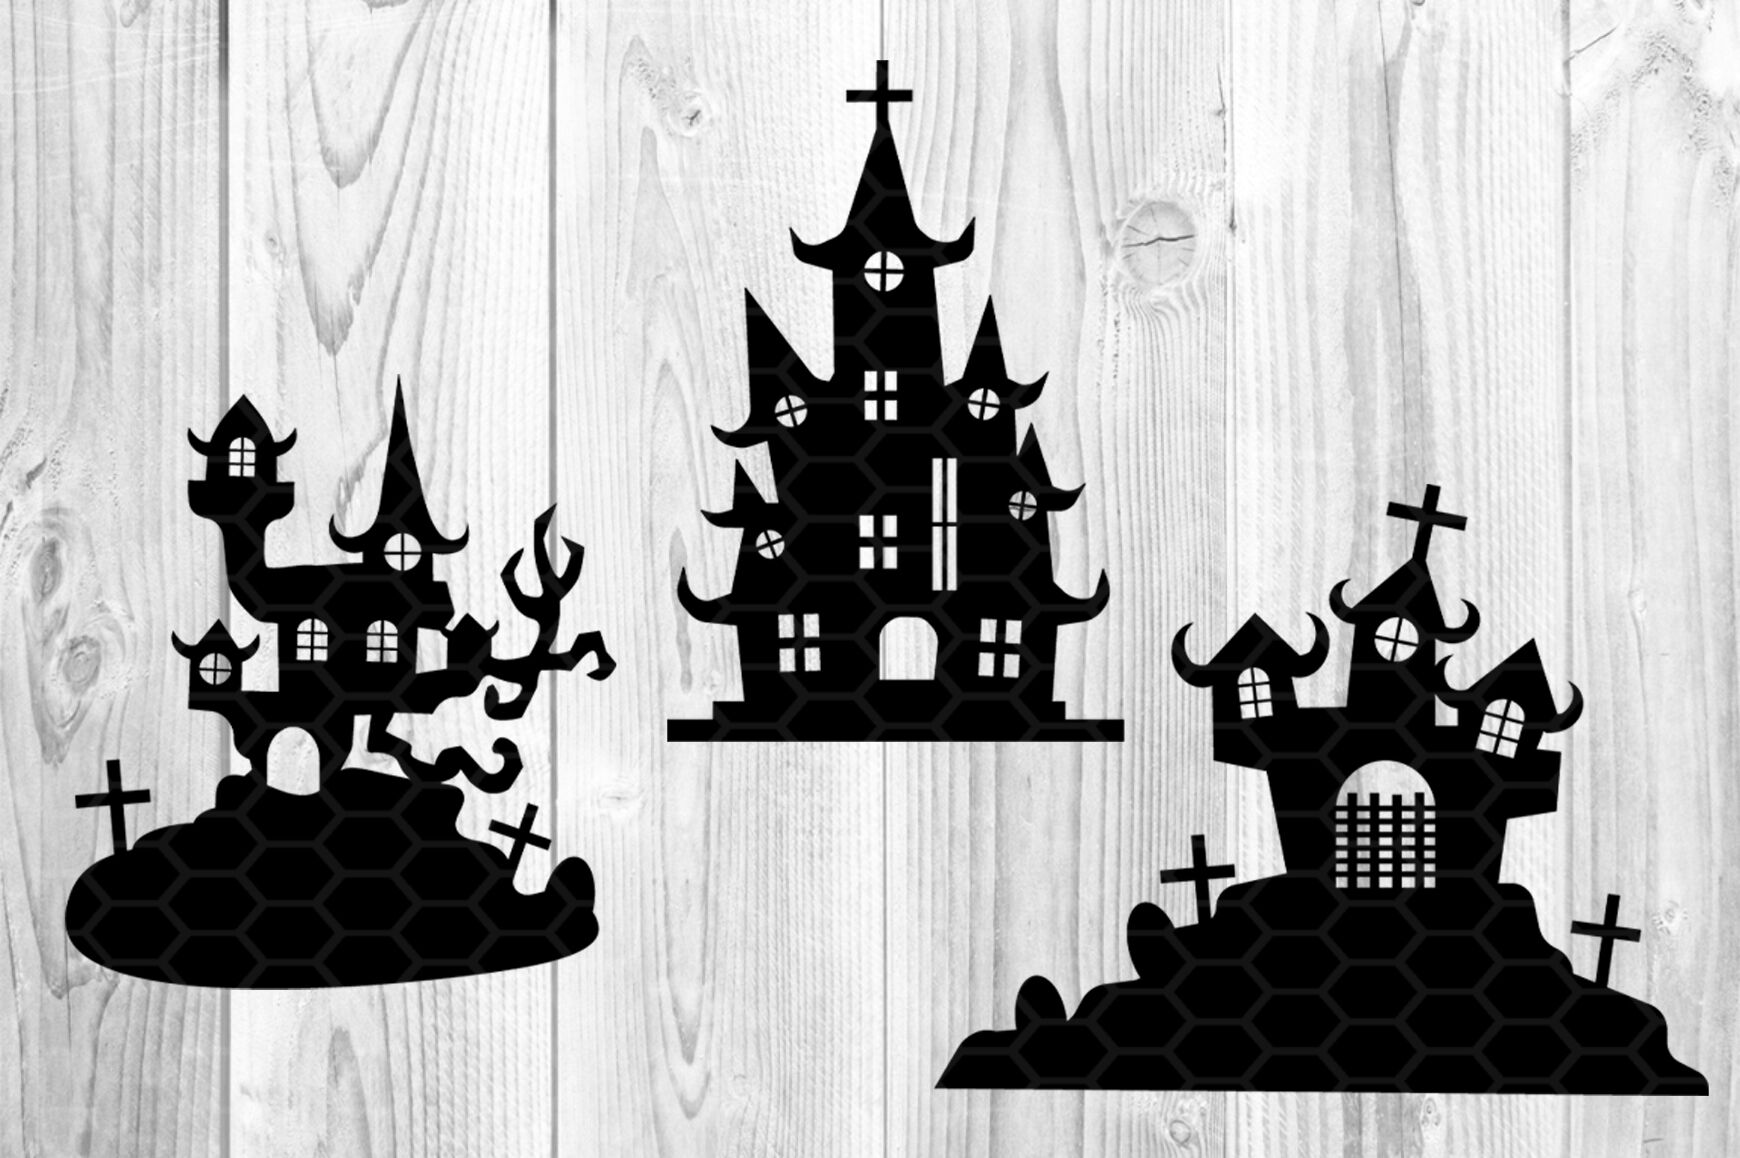 Haunted House Silhouette Template